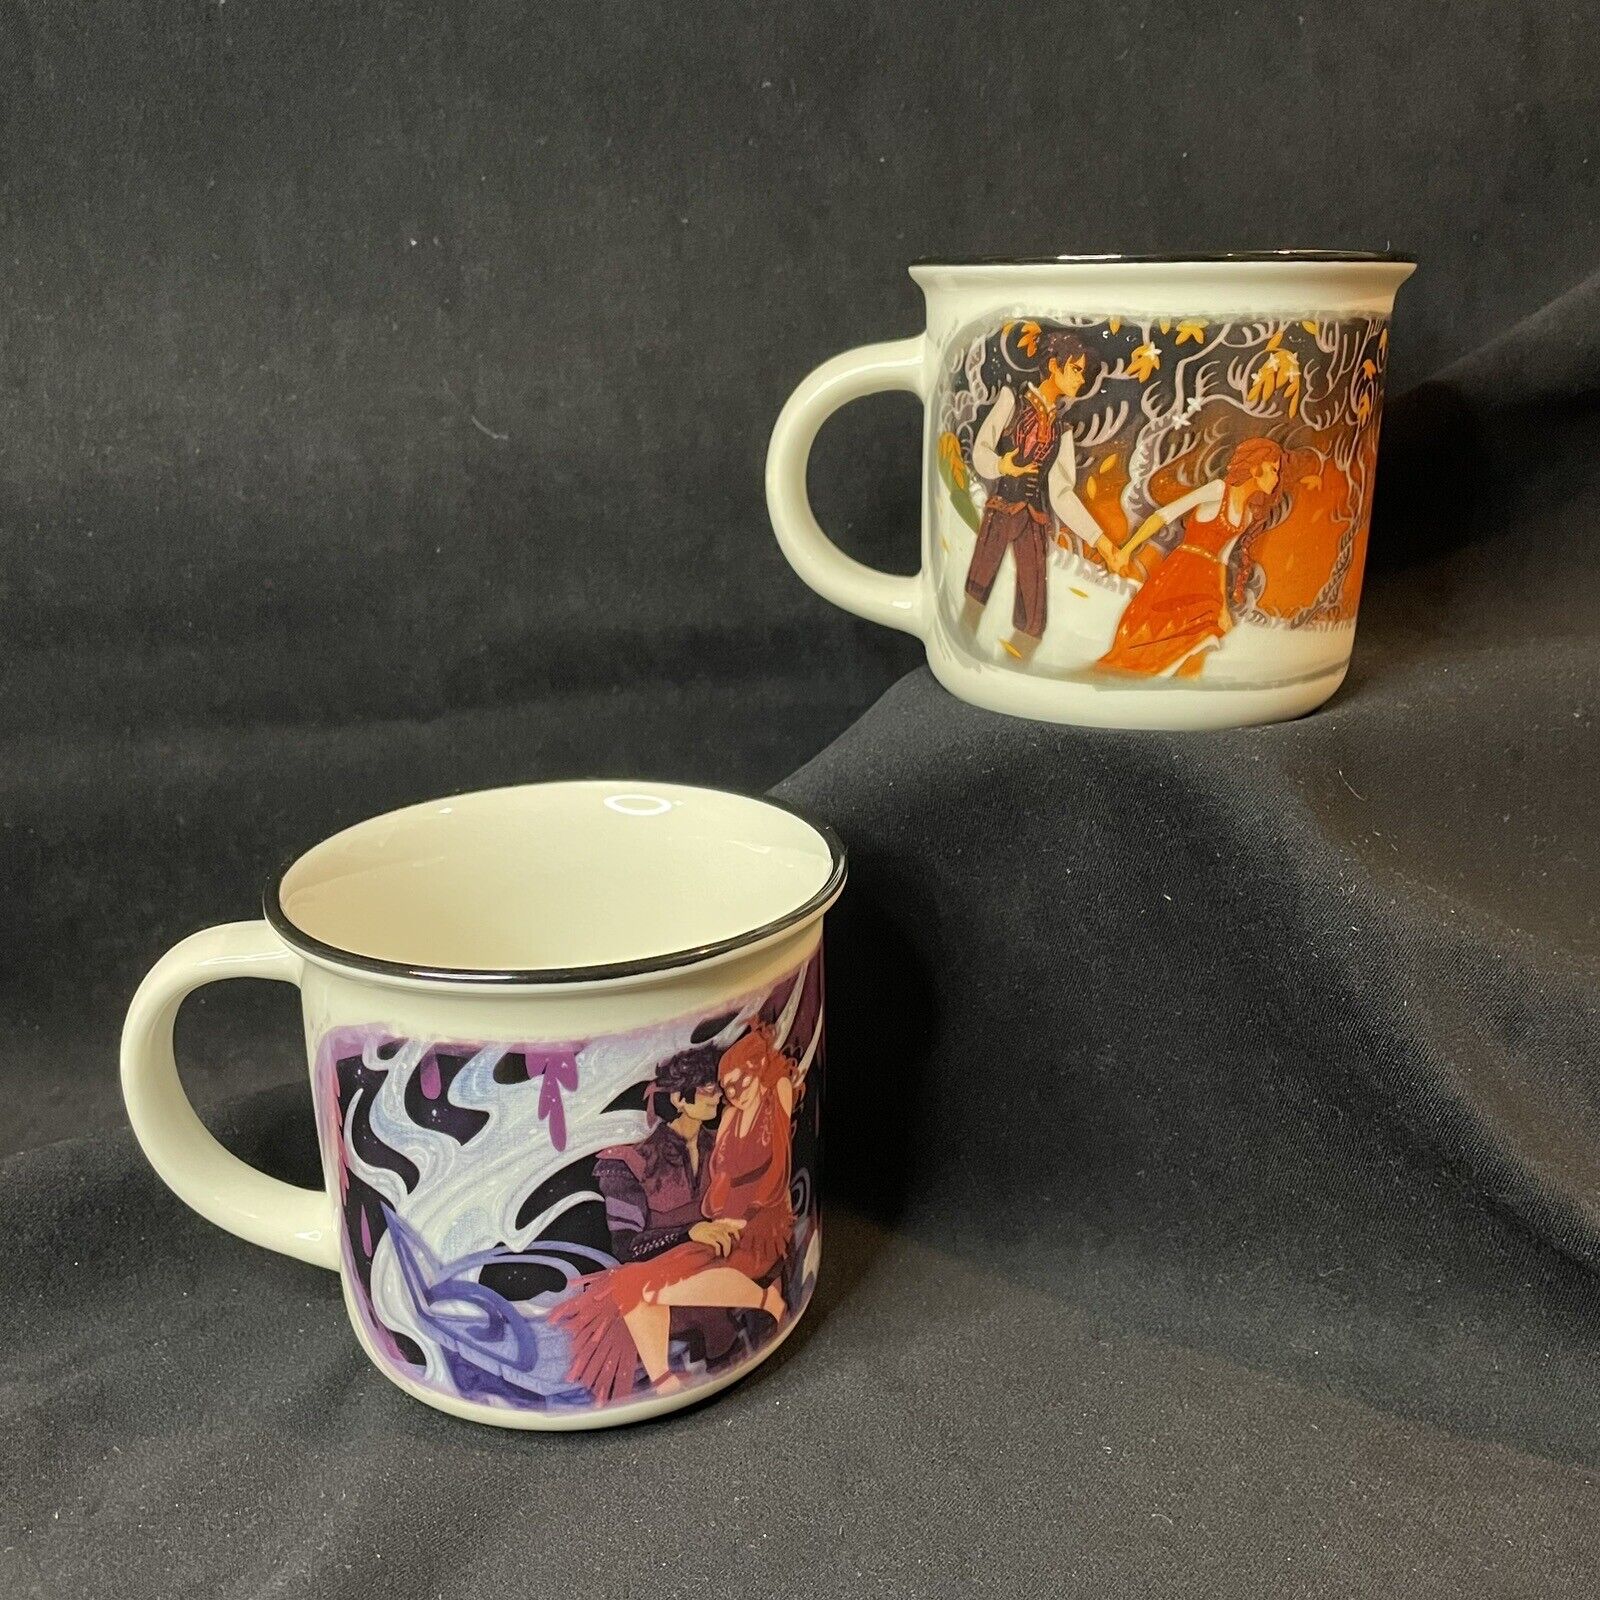 2 Illumicrate Rosiethorns88 Fantasy Mugs, Behind the Veil, Heart of the Wood